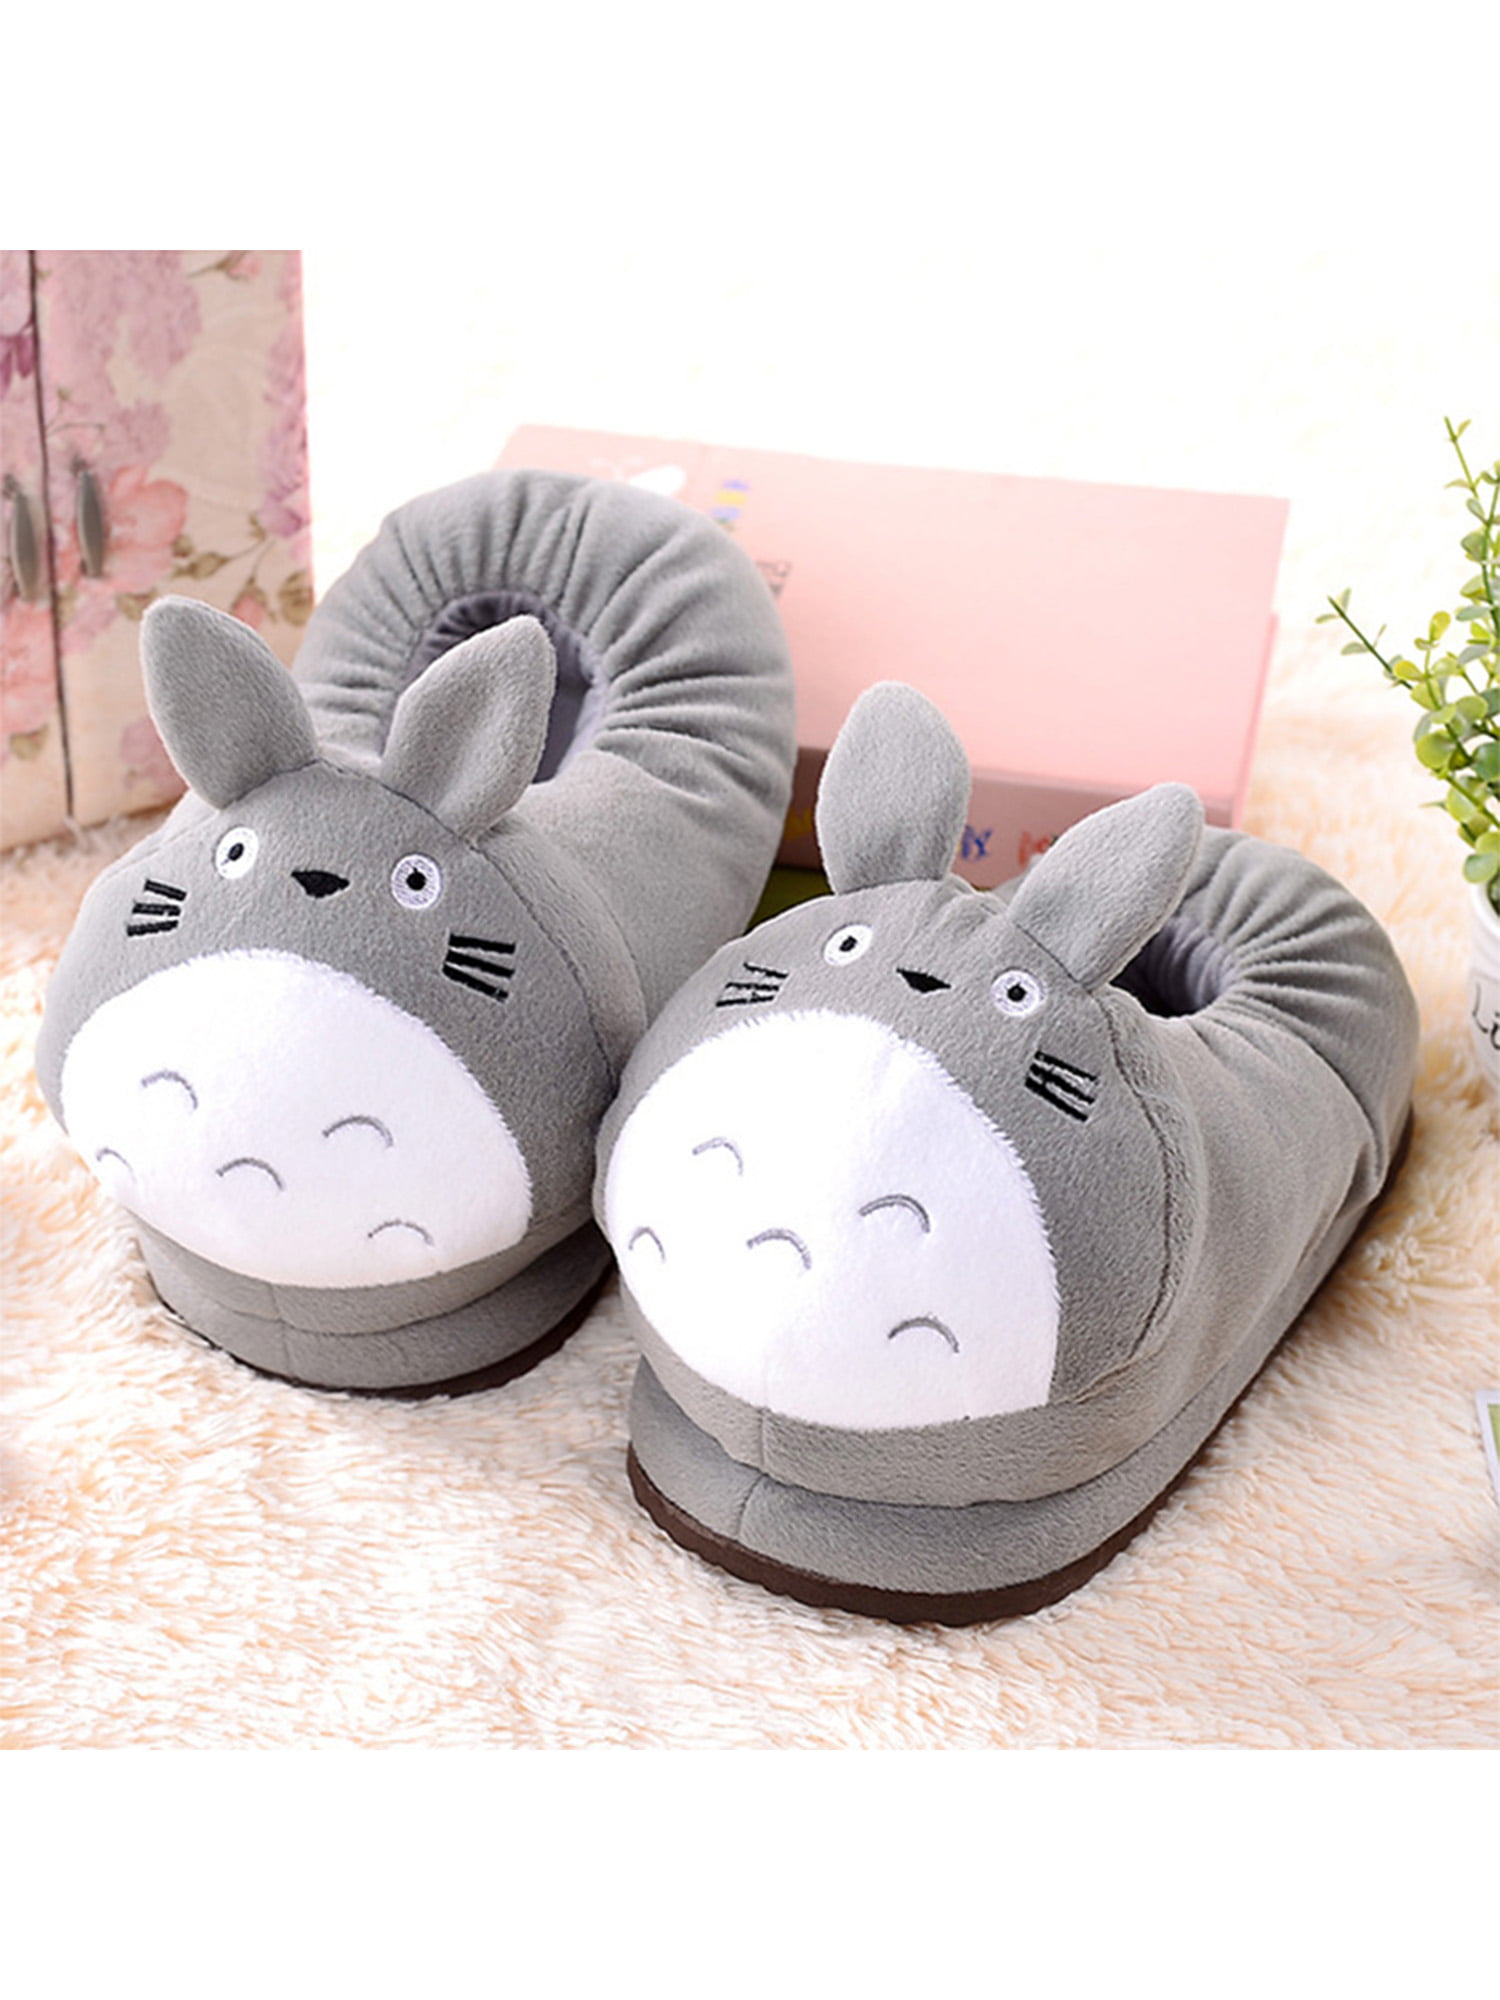 Mens Novelty Character Plush 3D Animal Slippers Booties Mules Boys Xmas Gift Siz 